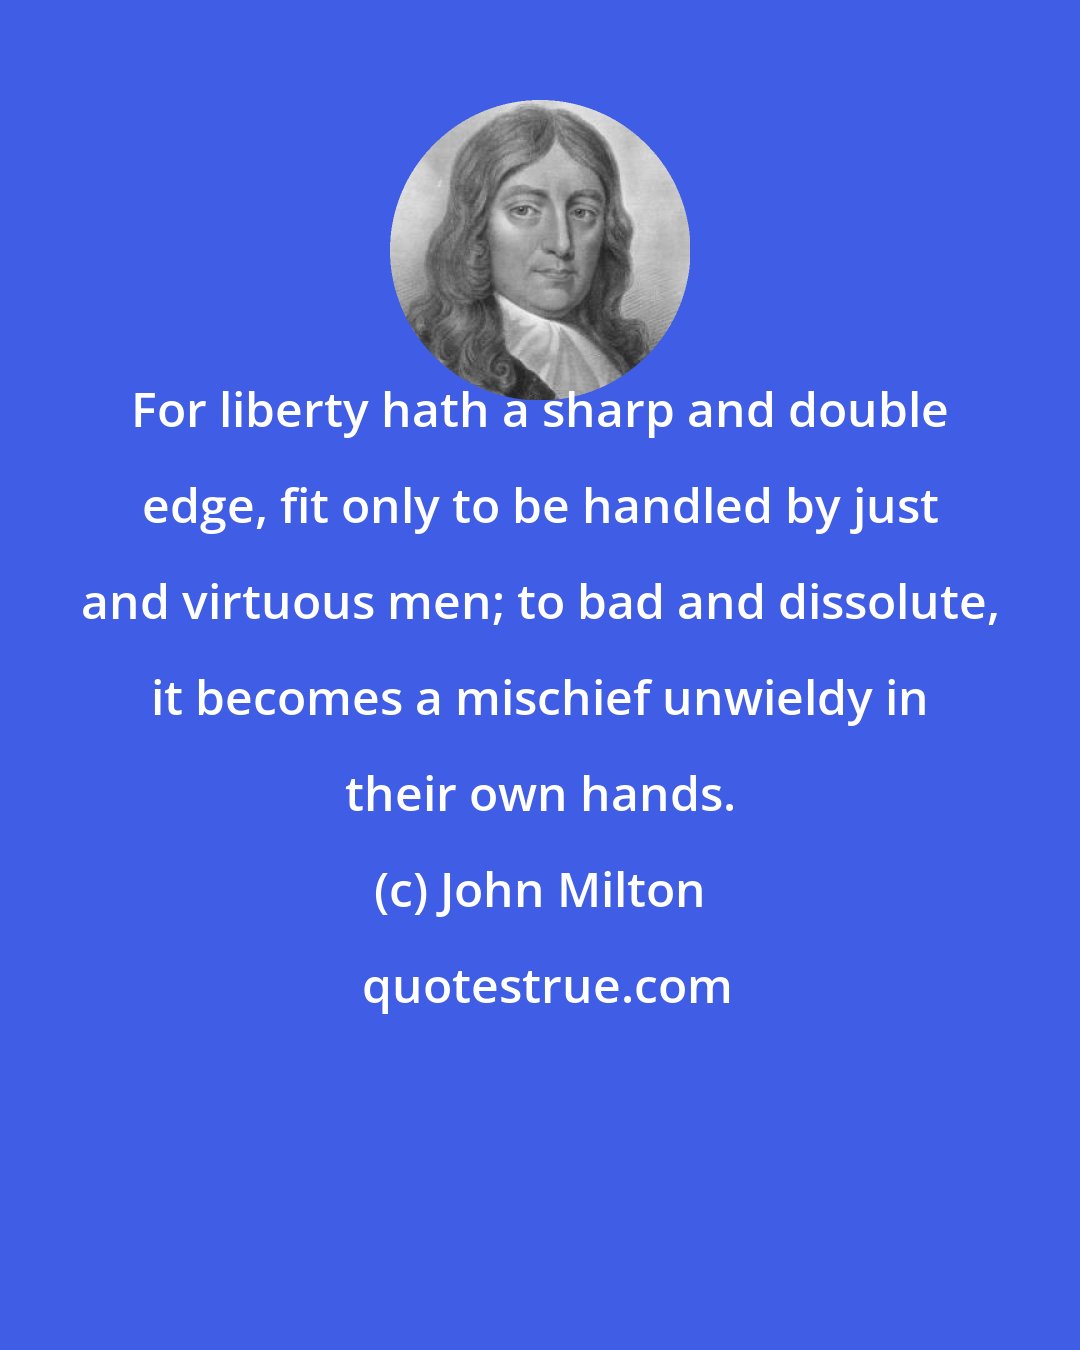 John Milton: For liberty hath a sharp and double edge, fit only to be handled by just and virtuous men; to bad and dissolute, it becomes a mischief unwieldy in their own hands.